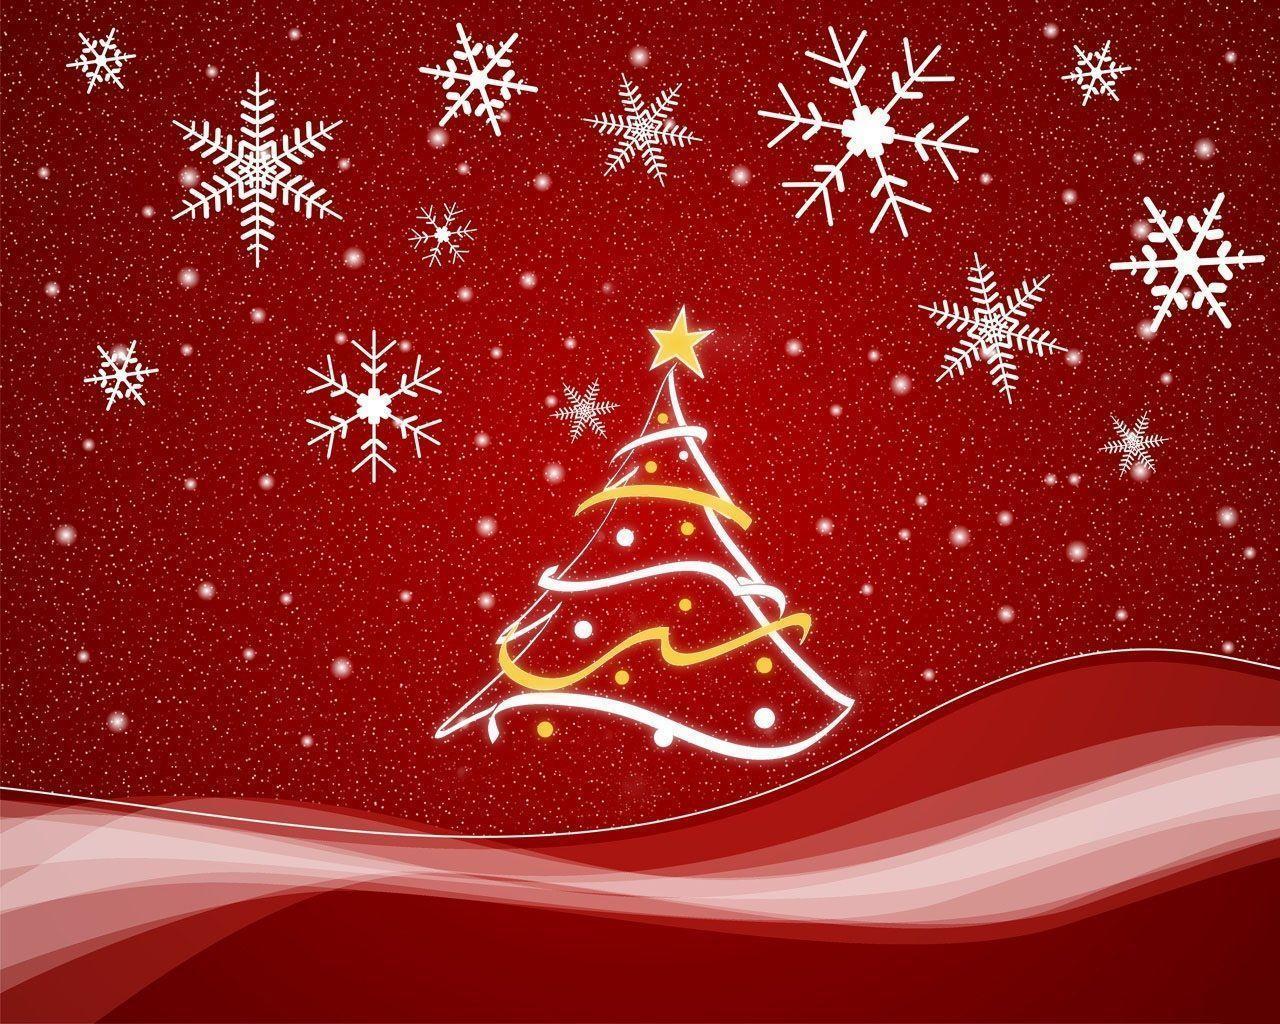 Merry Christmas 2015 Wallpaper Free Christmas Picture Xmas HD